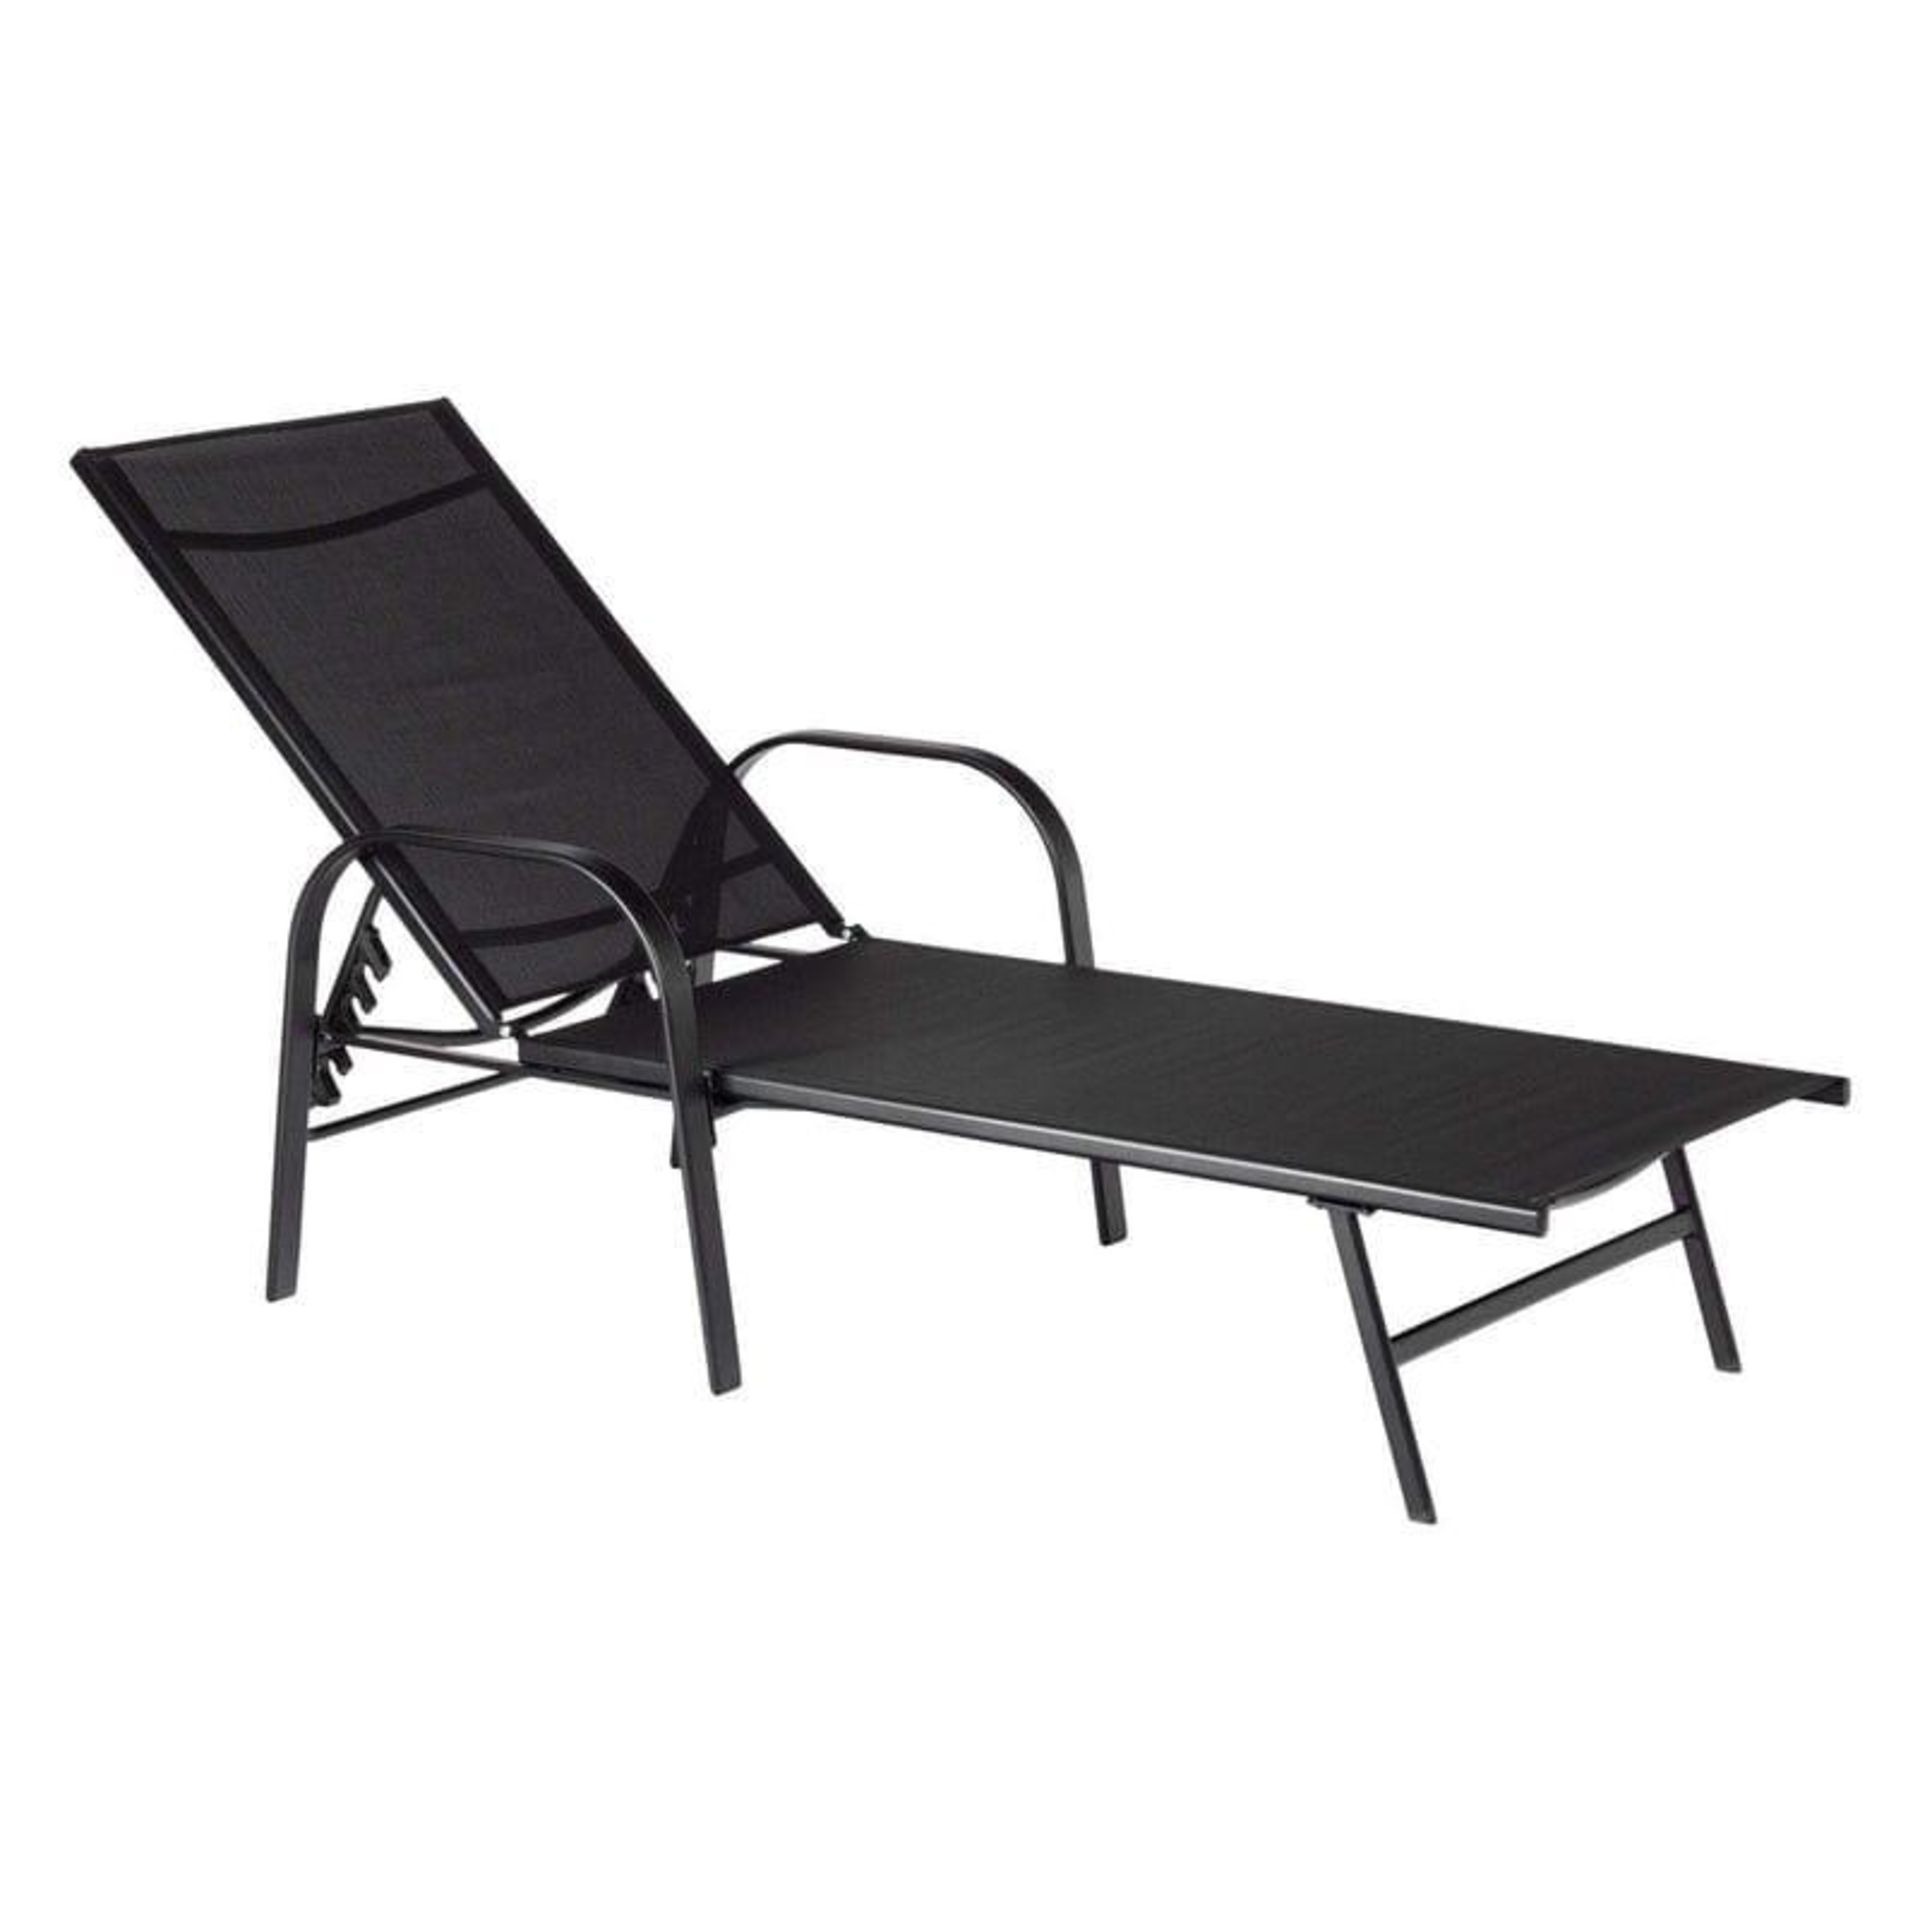 BRAND NEW & BOXED Adjustable Reclining Outdoor Patio Sun Lounger in Black - Image 2 of 6